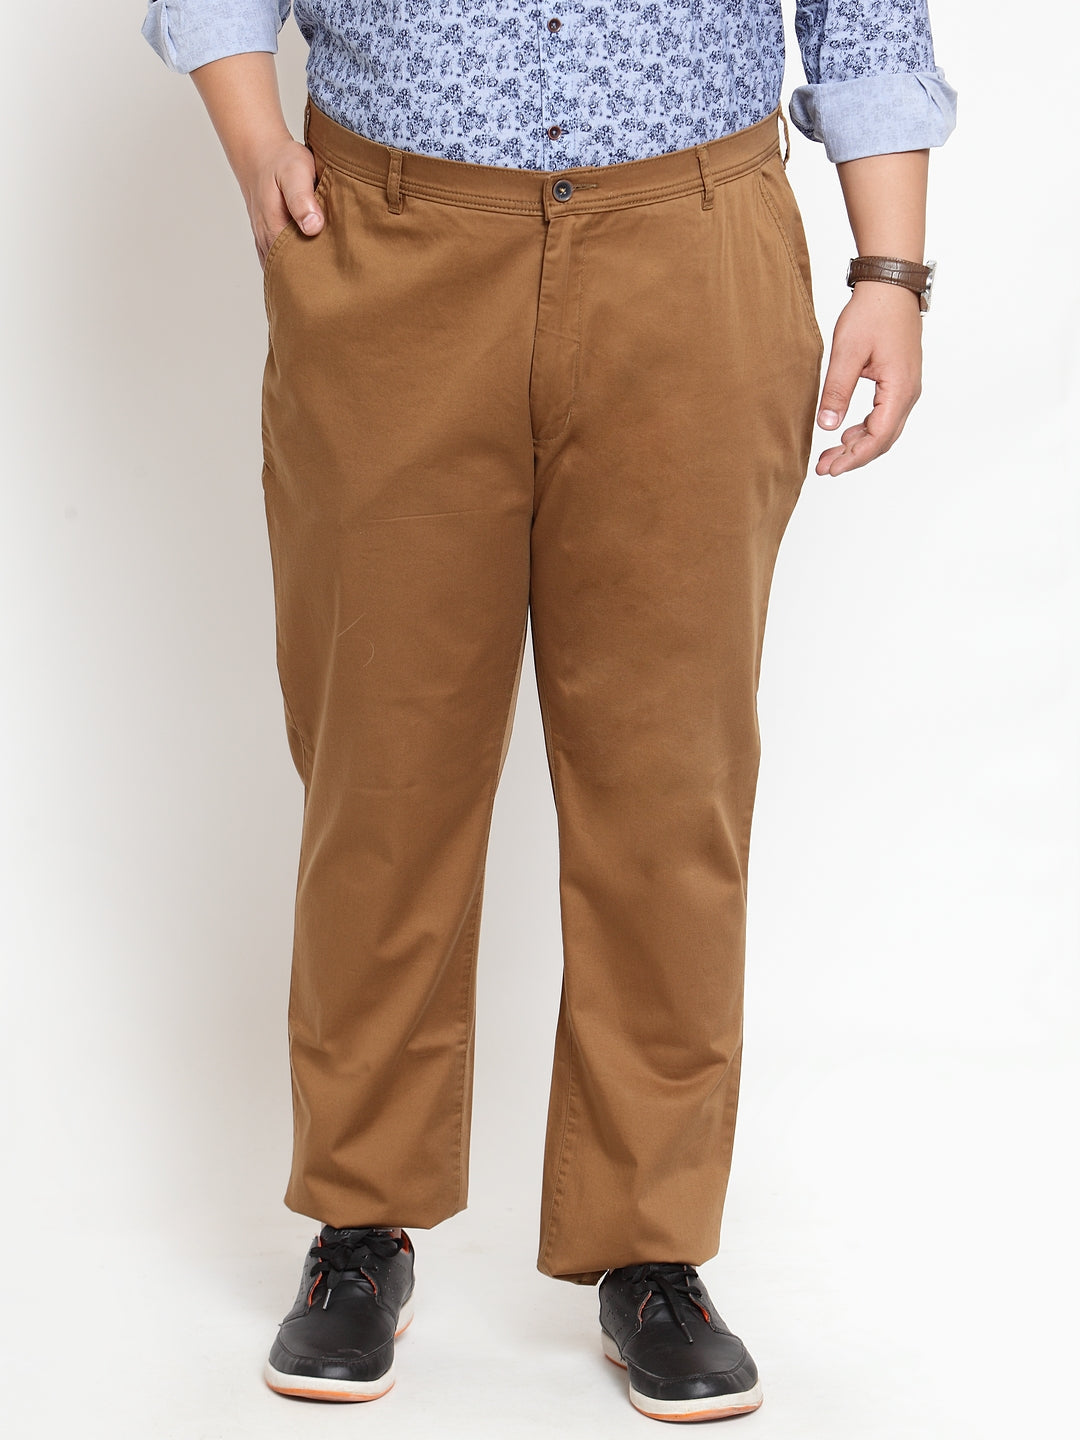 Cotton Flat Trousers Men Black Chinos, Size: 32 Inch at Rs 799/piece in  Mumbai